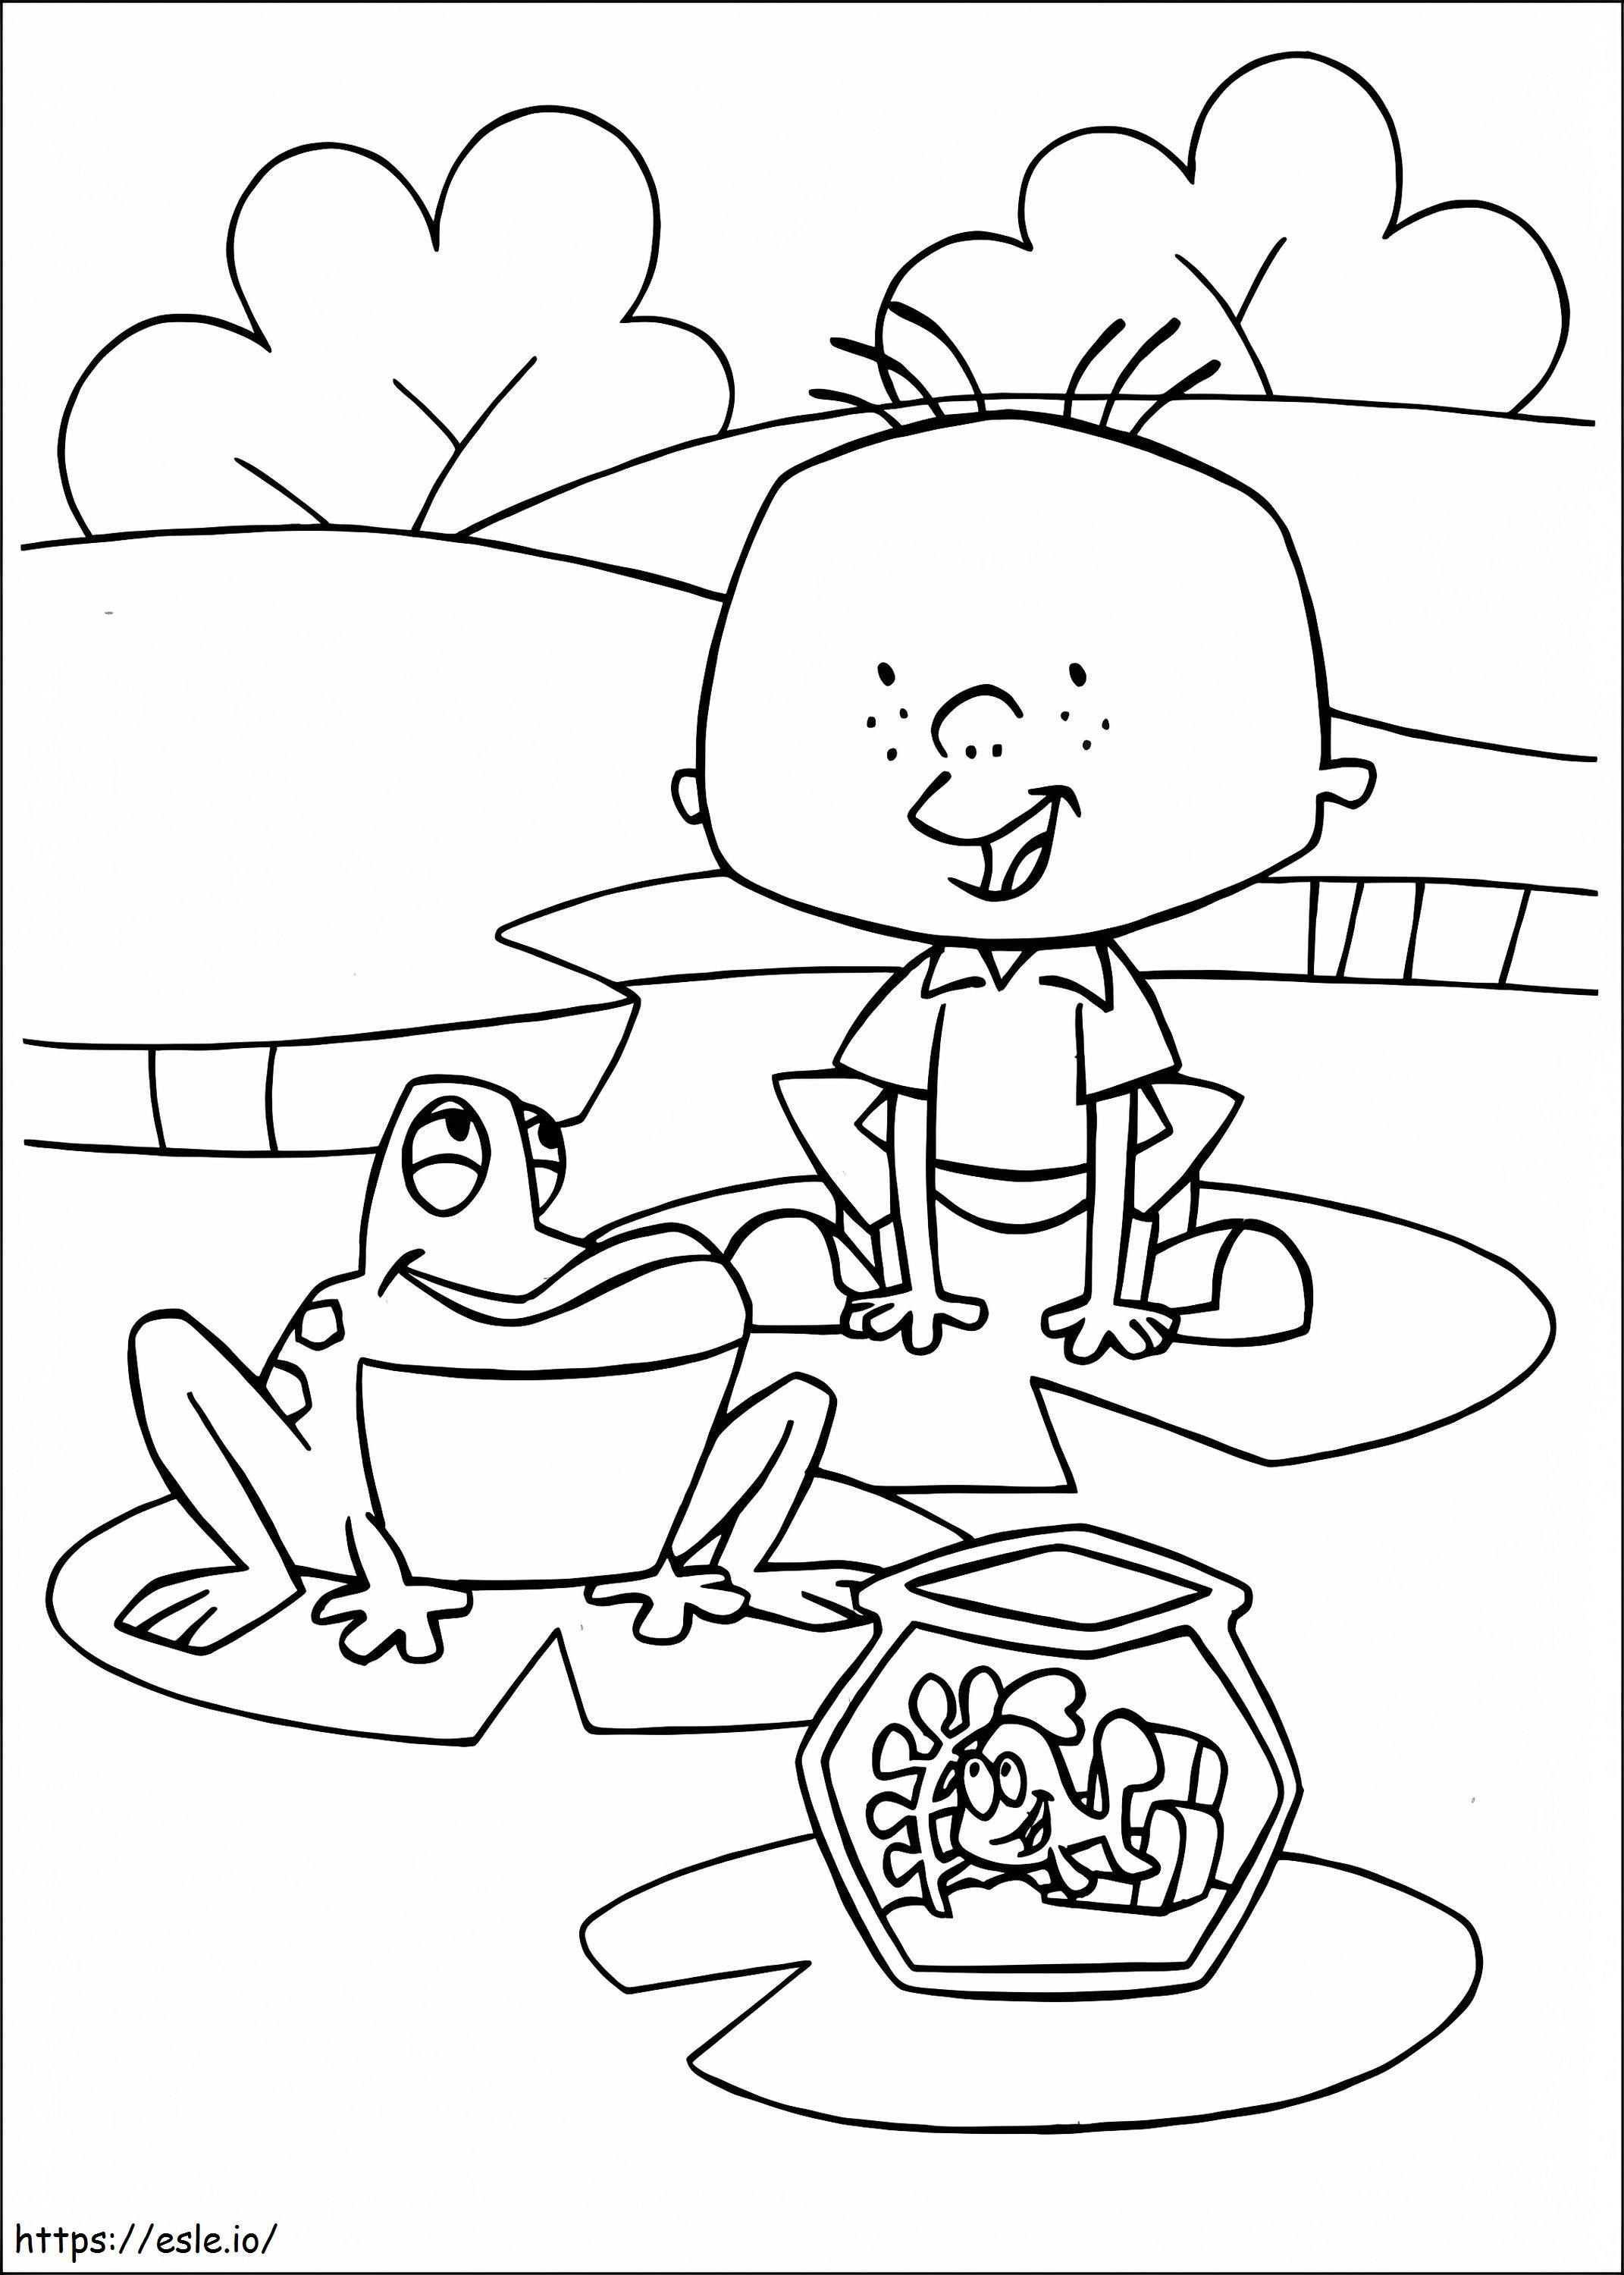 Stanley And Frog coloring page